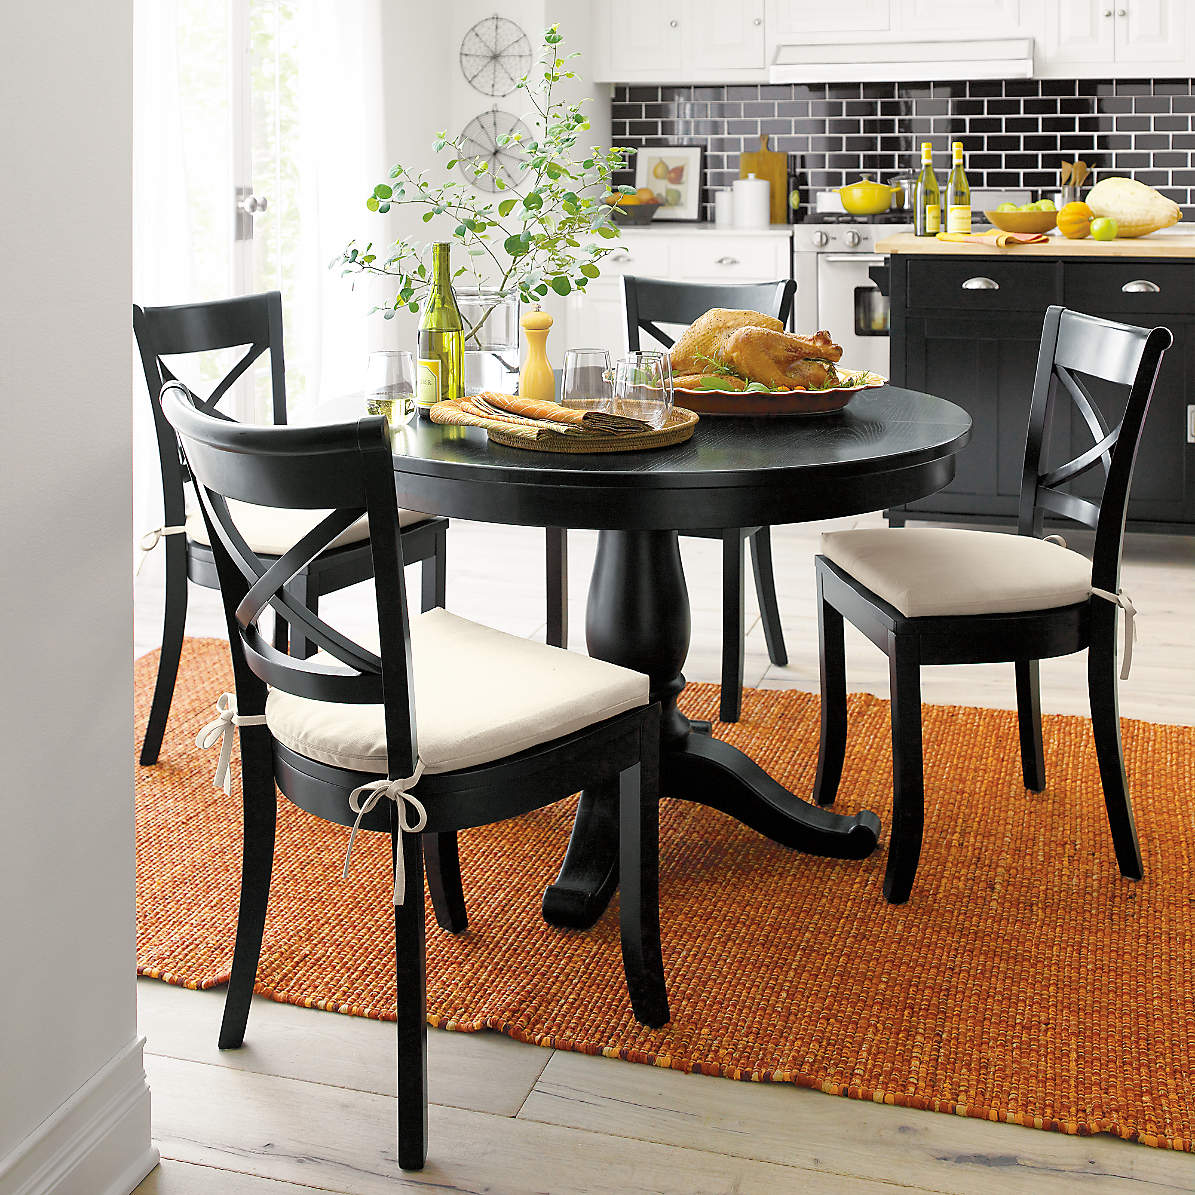 Avalon 45 Black Round Extension Dining, Black Round Extendable Dining Table Set